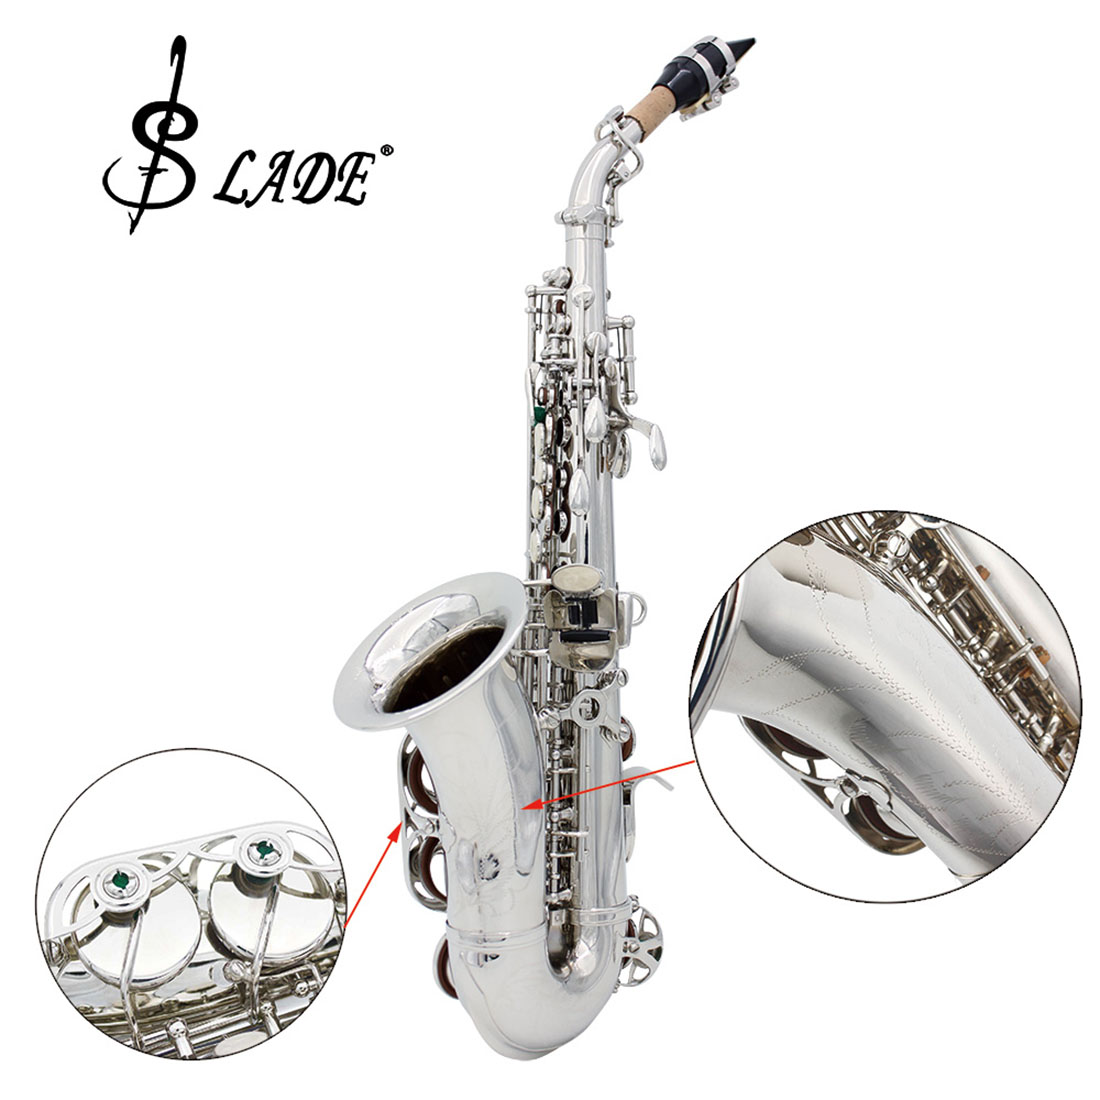 Slade Saxophone Alto Instrument E Fall Saxophone for Beginner with Cleaning Accessories - Photo: 3